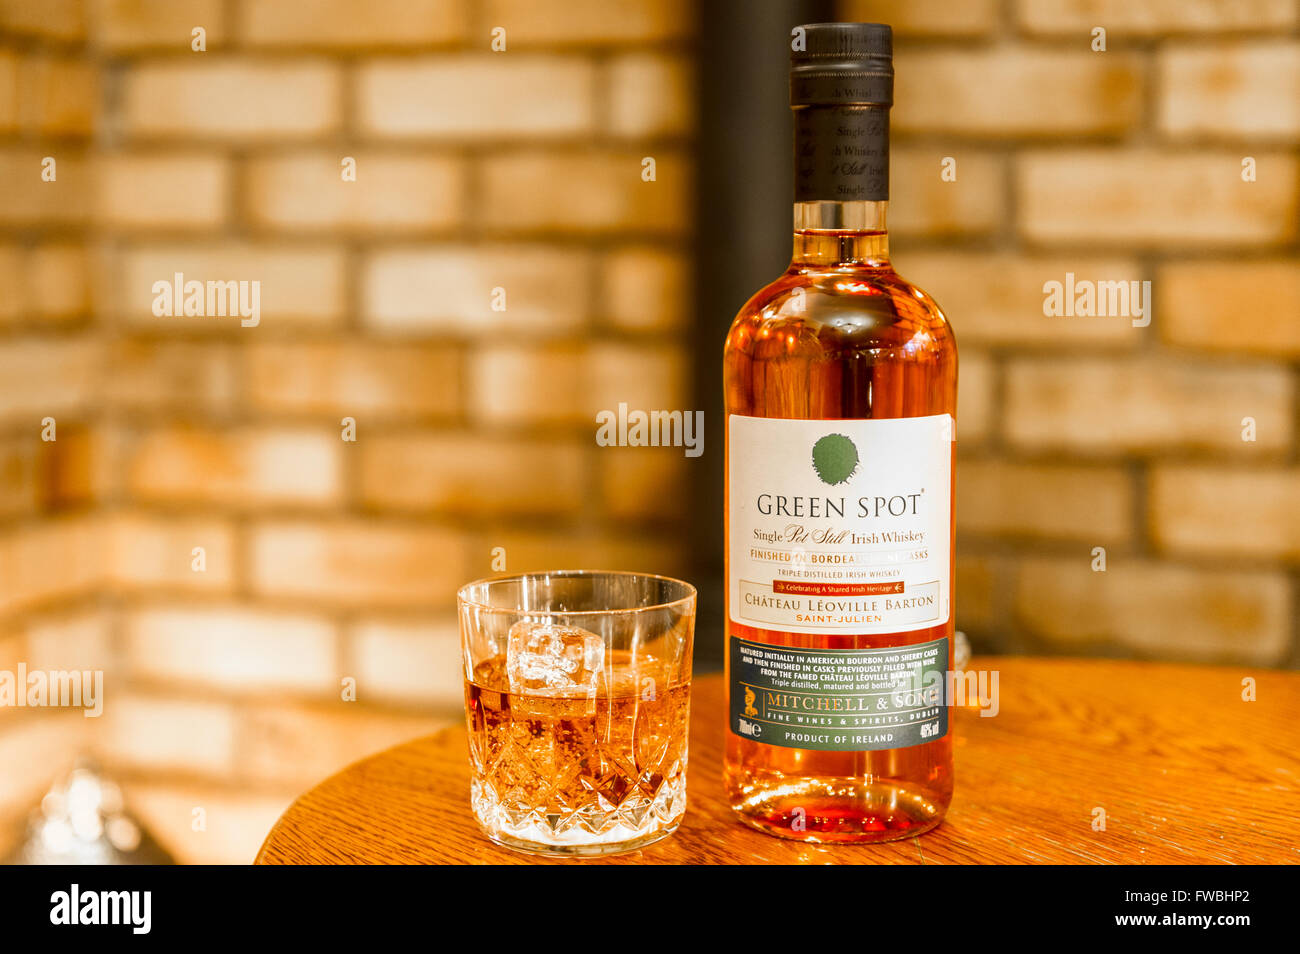 A bottle of Green Spot triple distilled whiskey with a glass of whiskey with ice cubes. Stock Photo